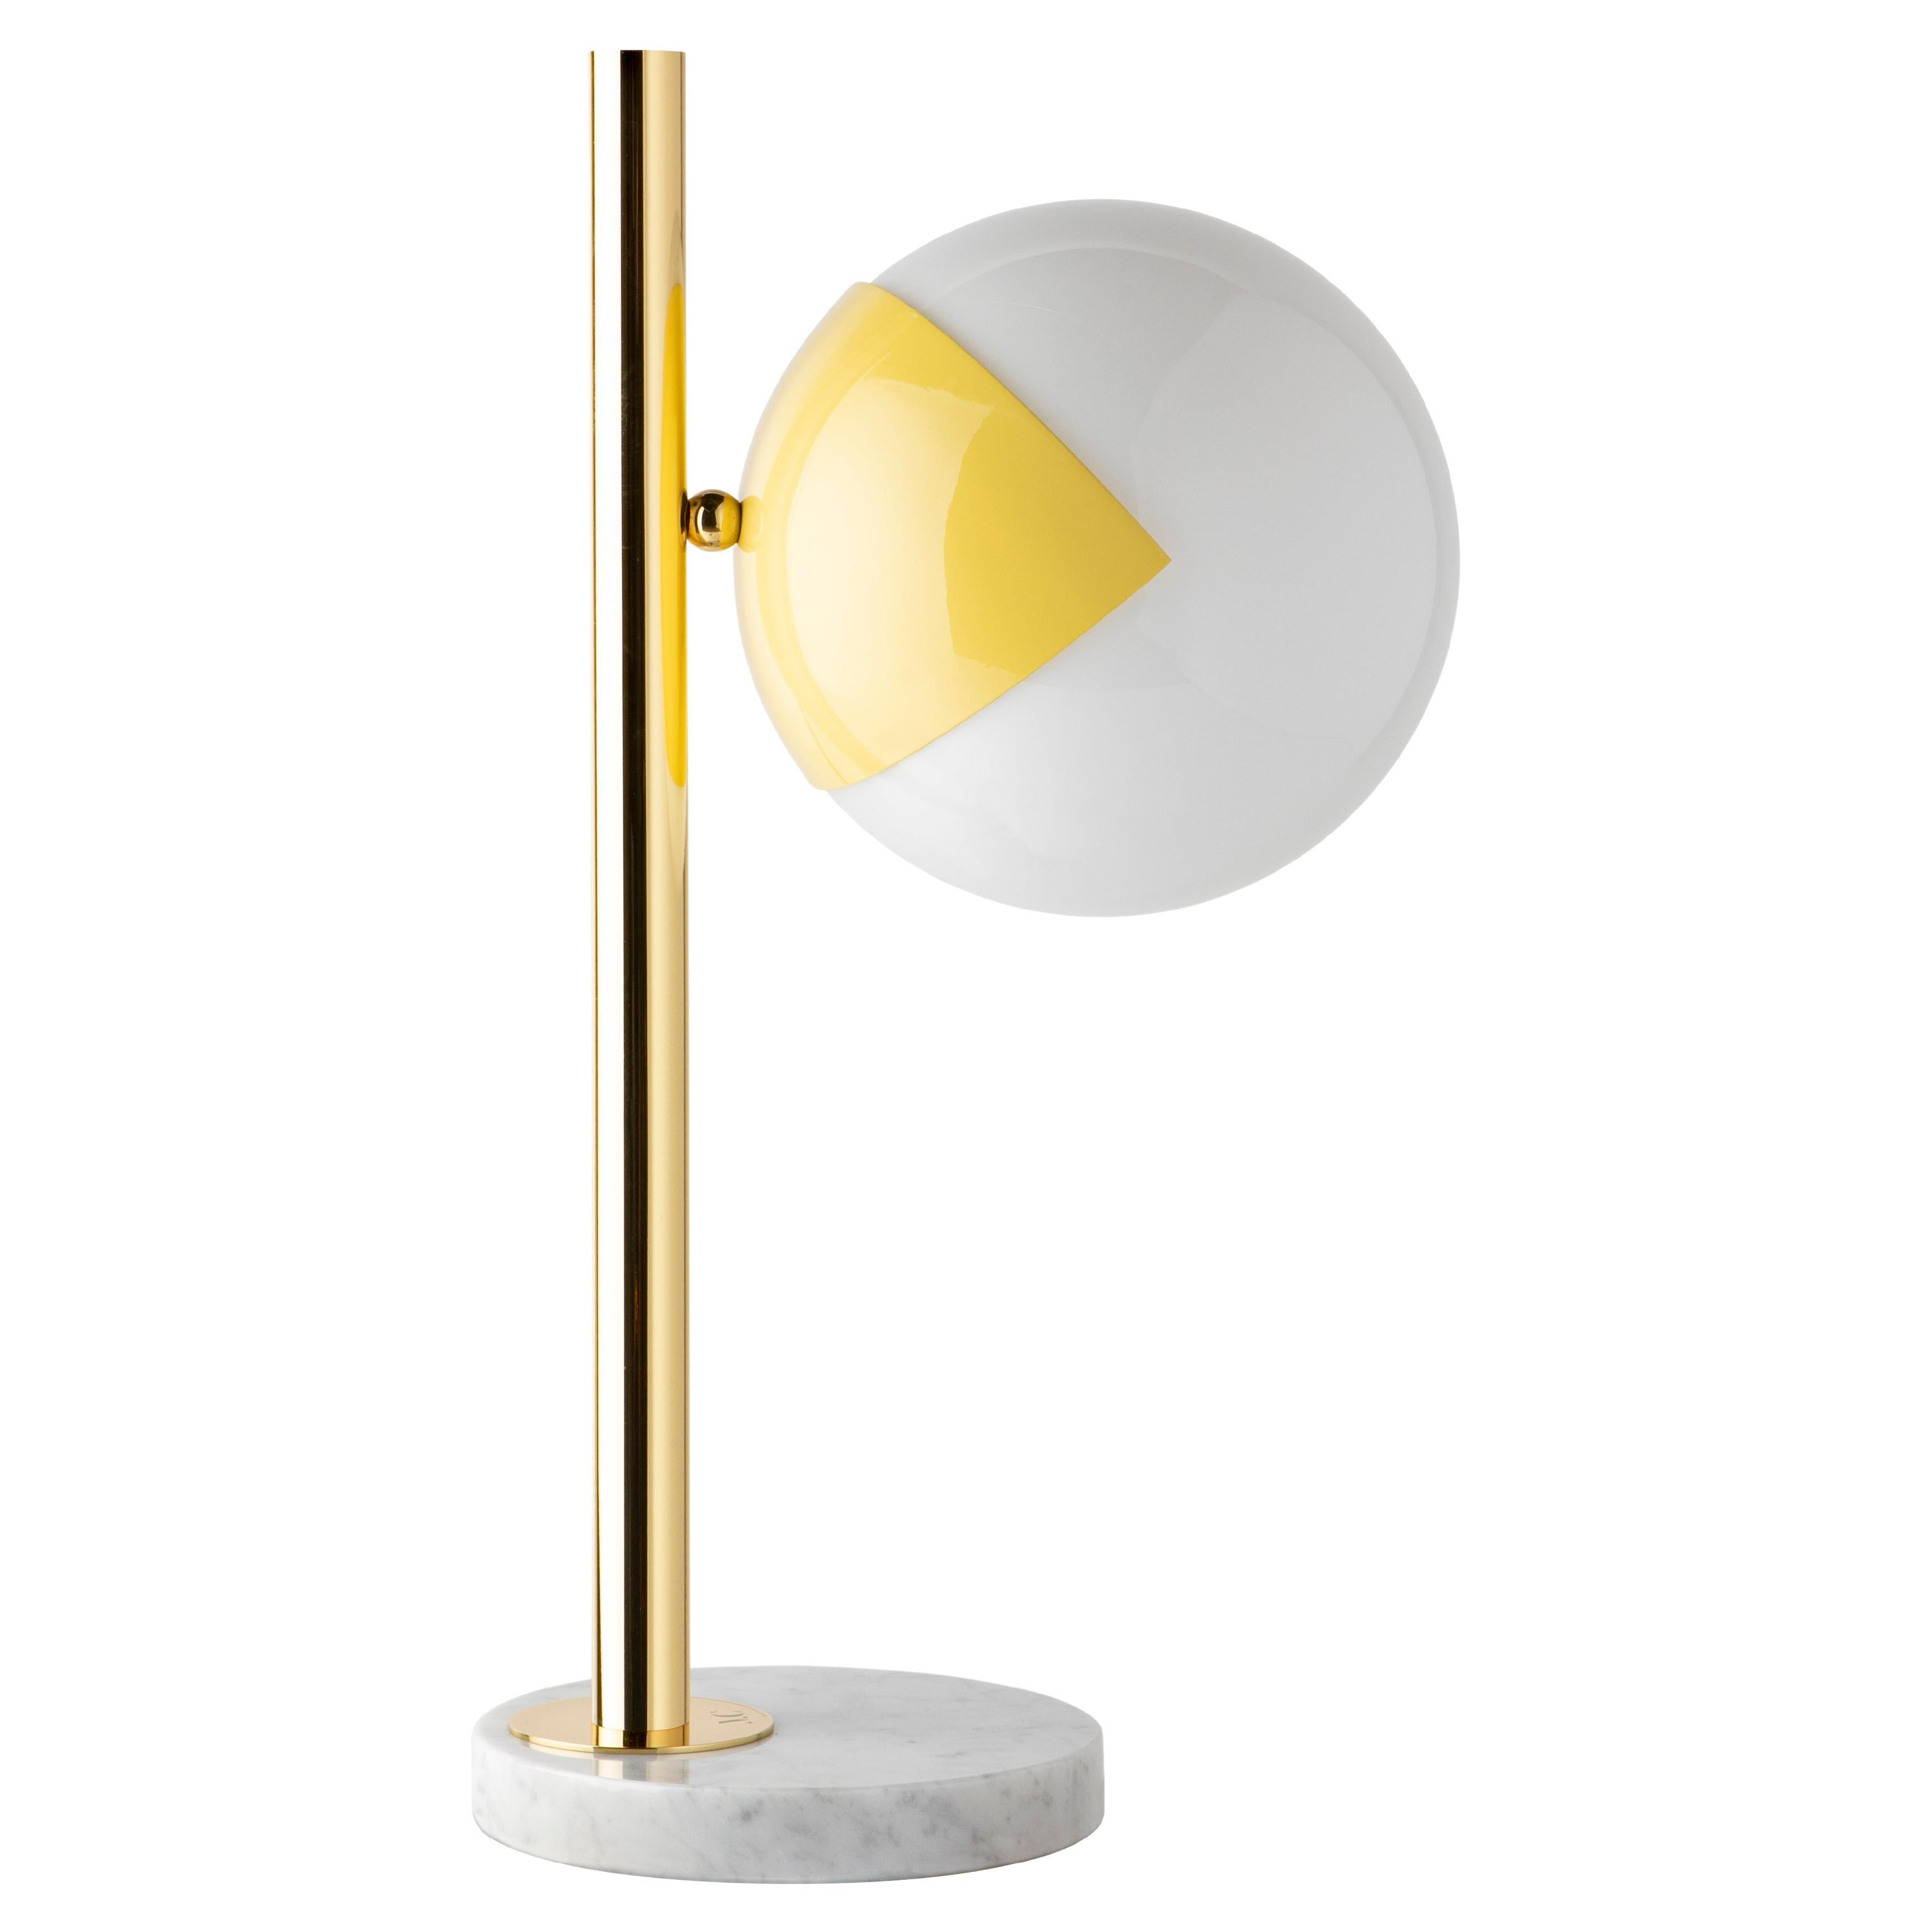 Set of 2 table lamp Pop-Up Dimmable by Magic Circus Editions
Dimensions: Ø 22 x 30 x 53 cm 
Materials: Carrara marble base, smooth brass tube, glossy mouth blown glass
Also non-dimmable version available.

All our lamps can be wired according